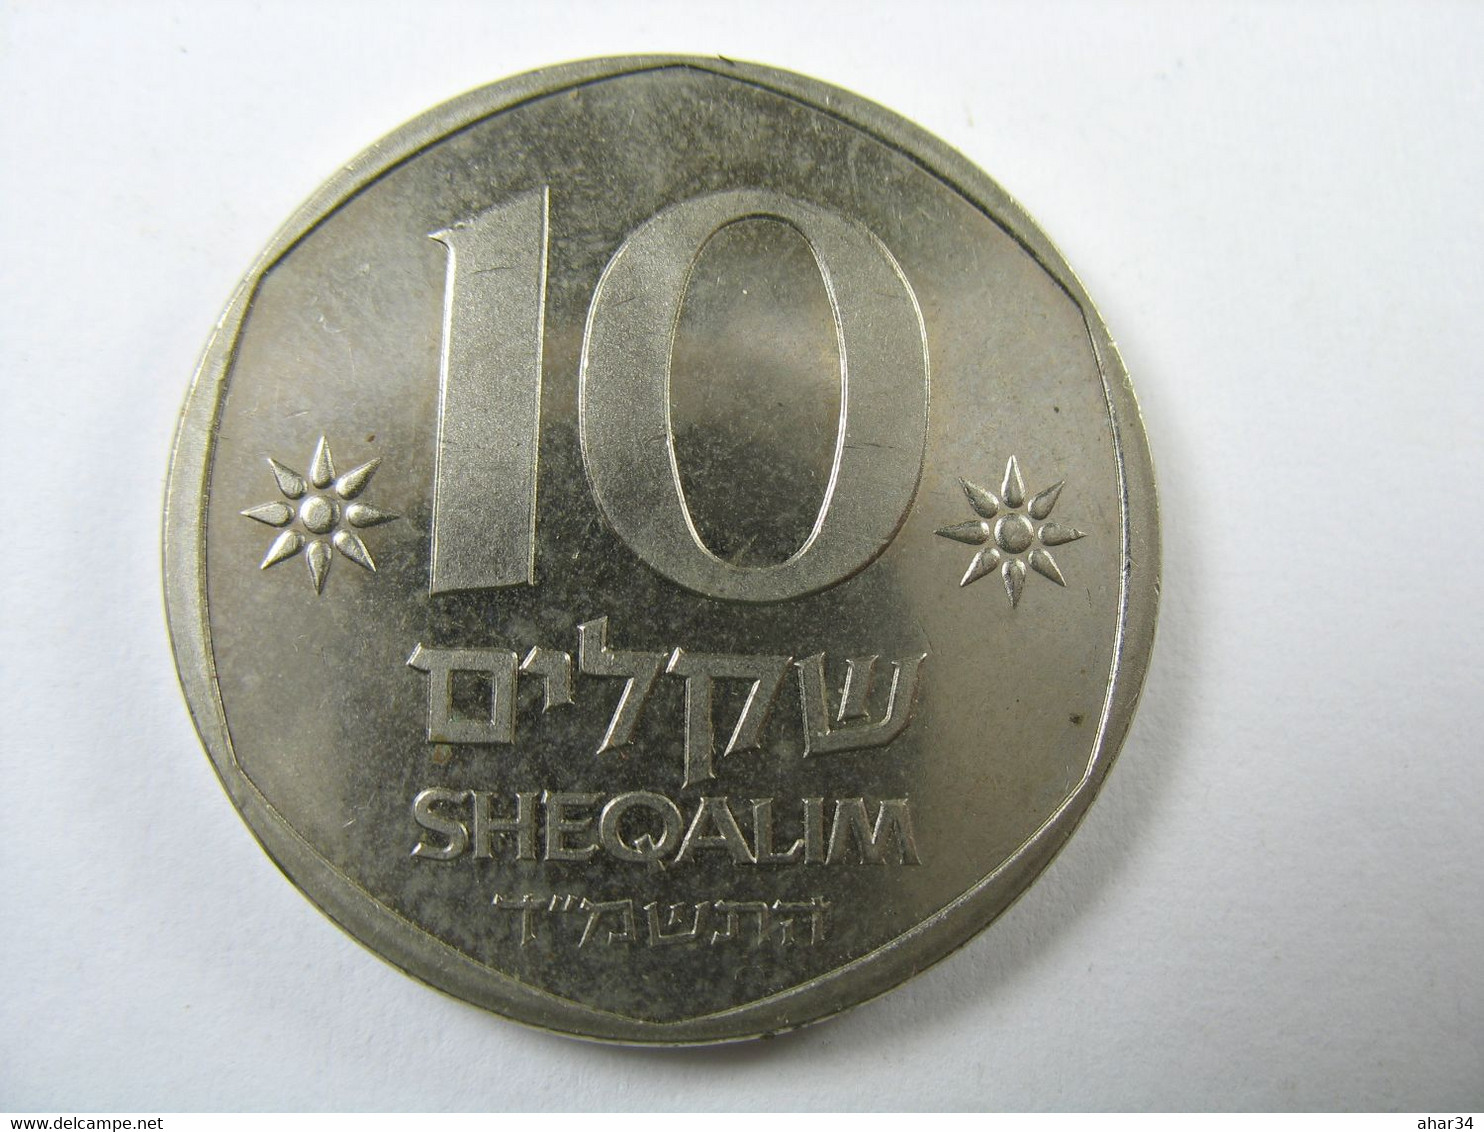 TEMPLATE LISTING ISRAEL  LOT OF  25  COINS 10 SHEQALIM HERTZEL  UNC   1984  COIN . - Autres – Asie